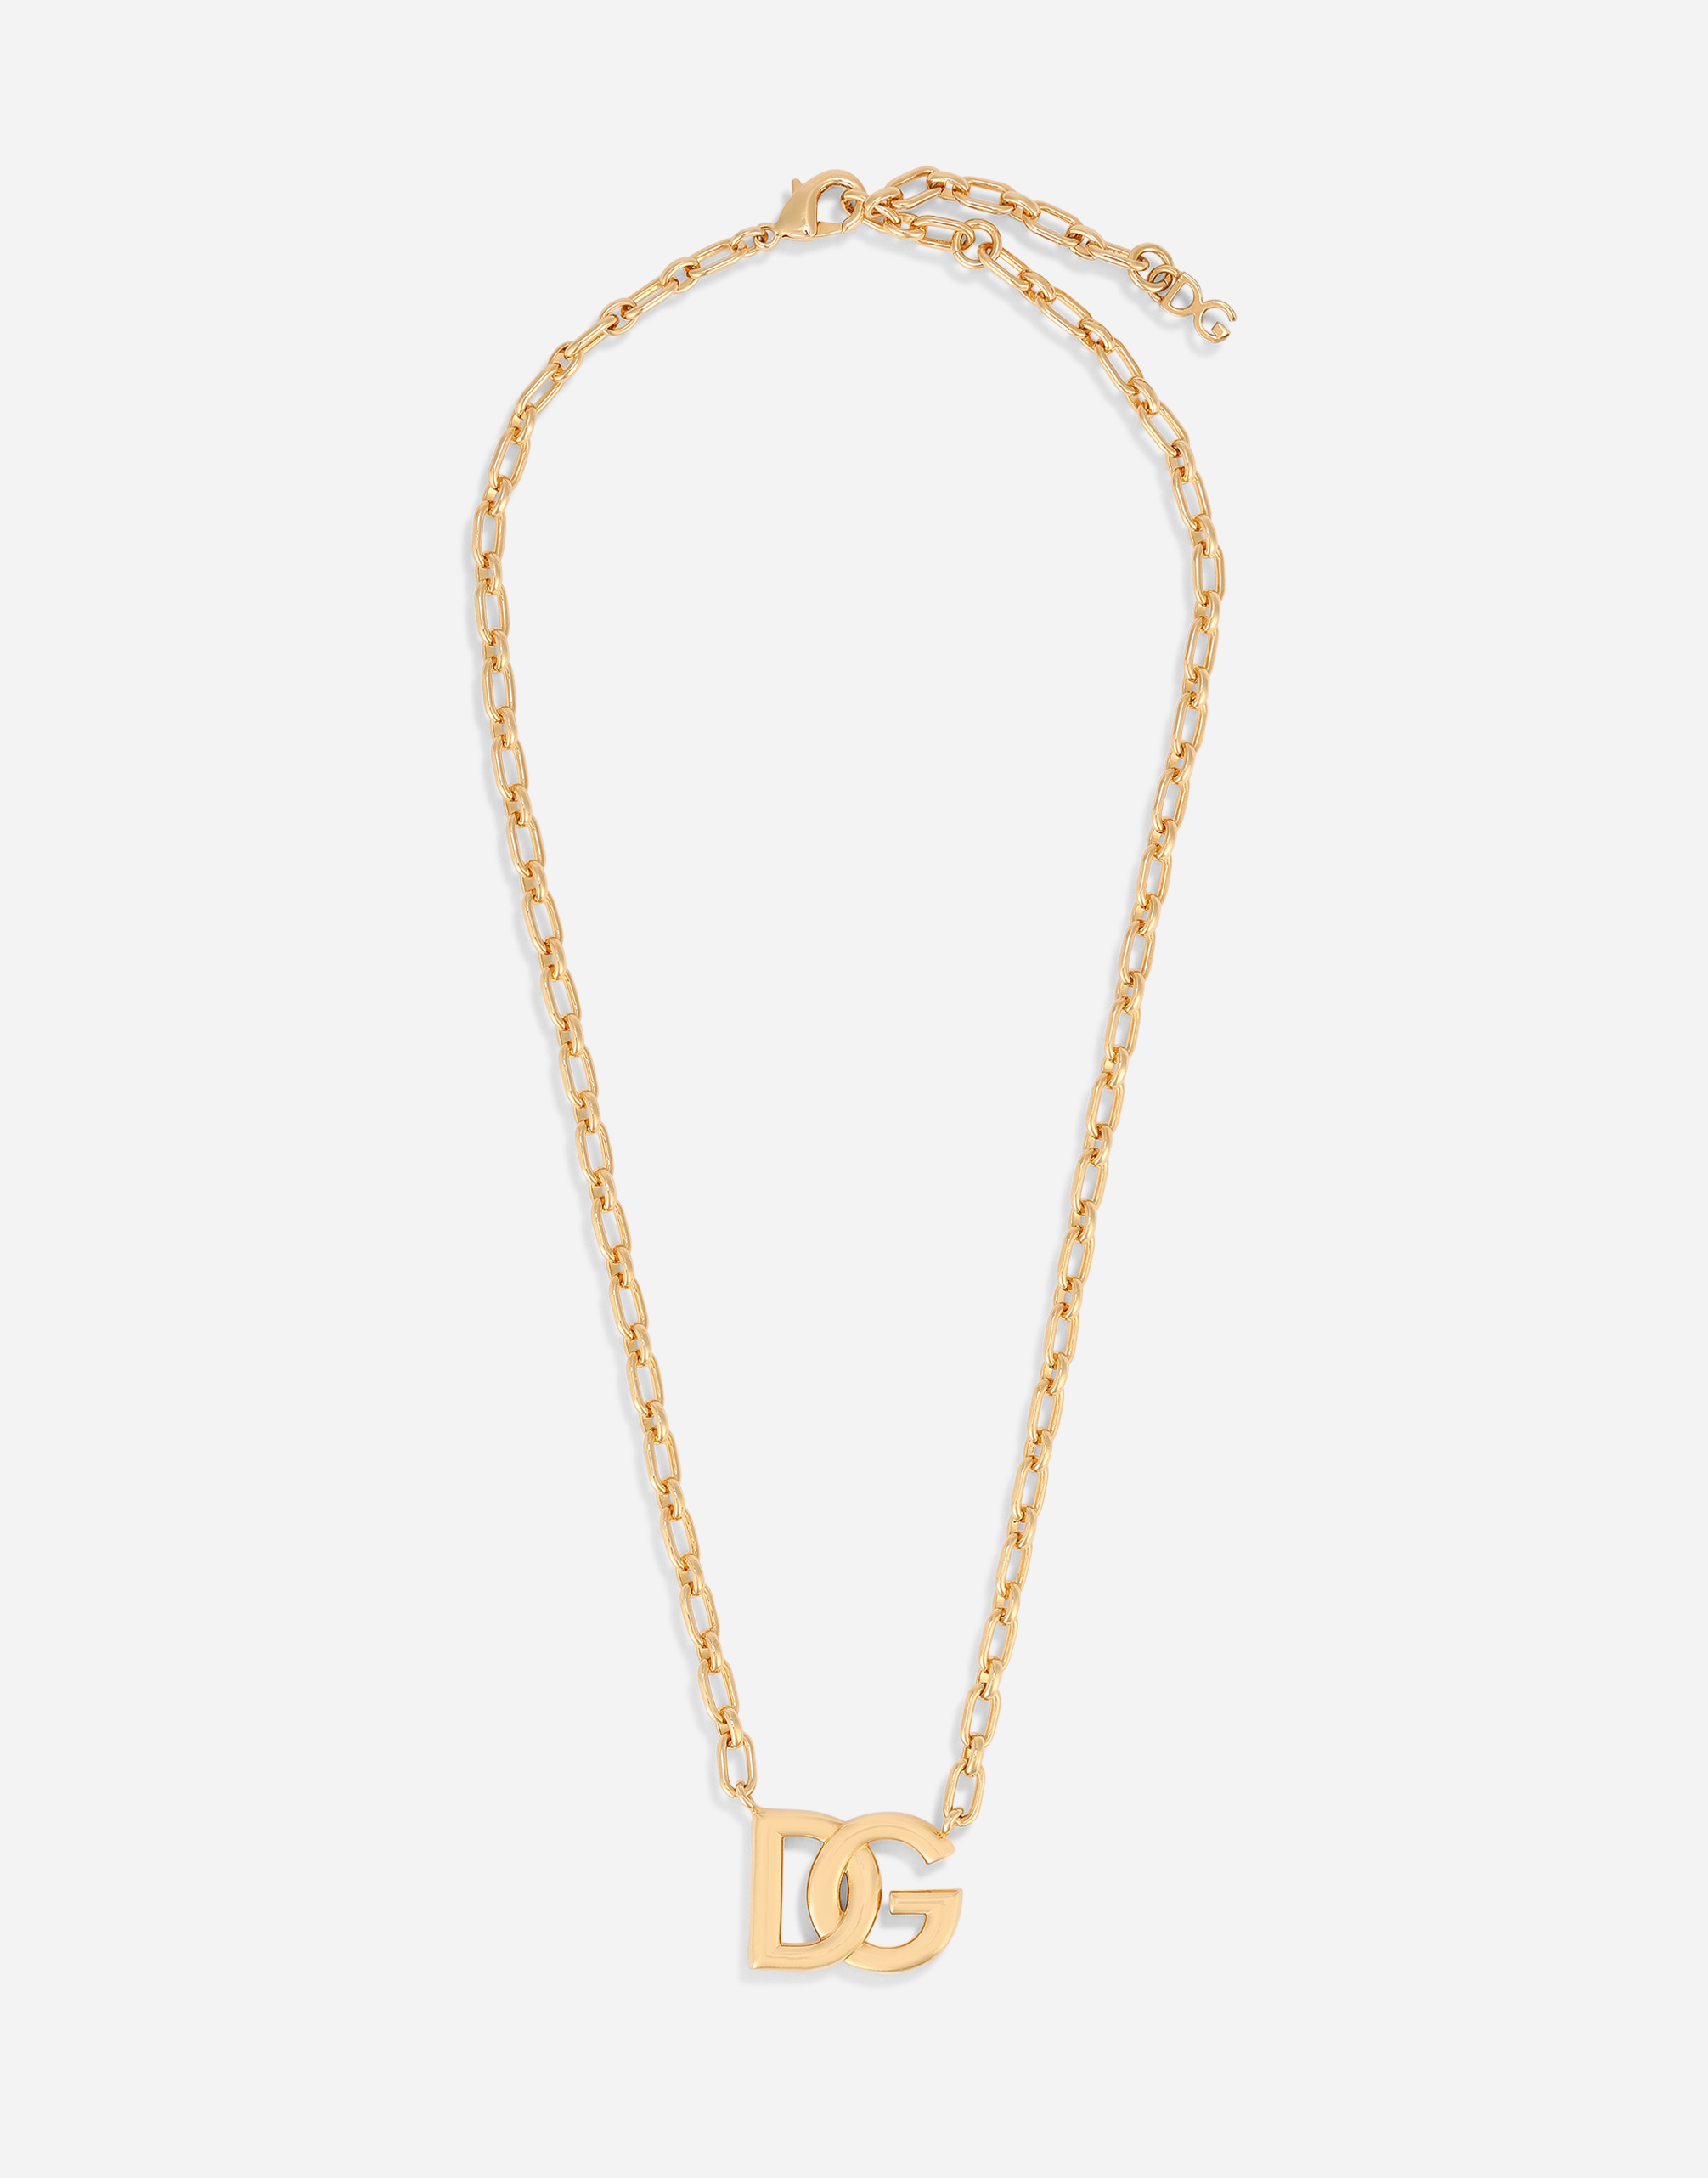 Chain necklace with DG logo in Gold